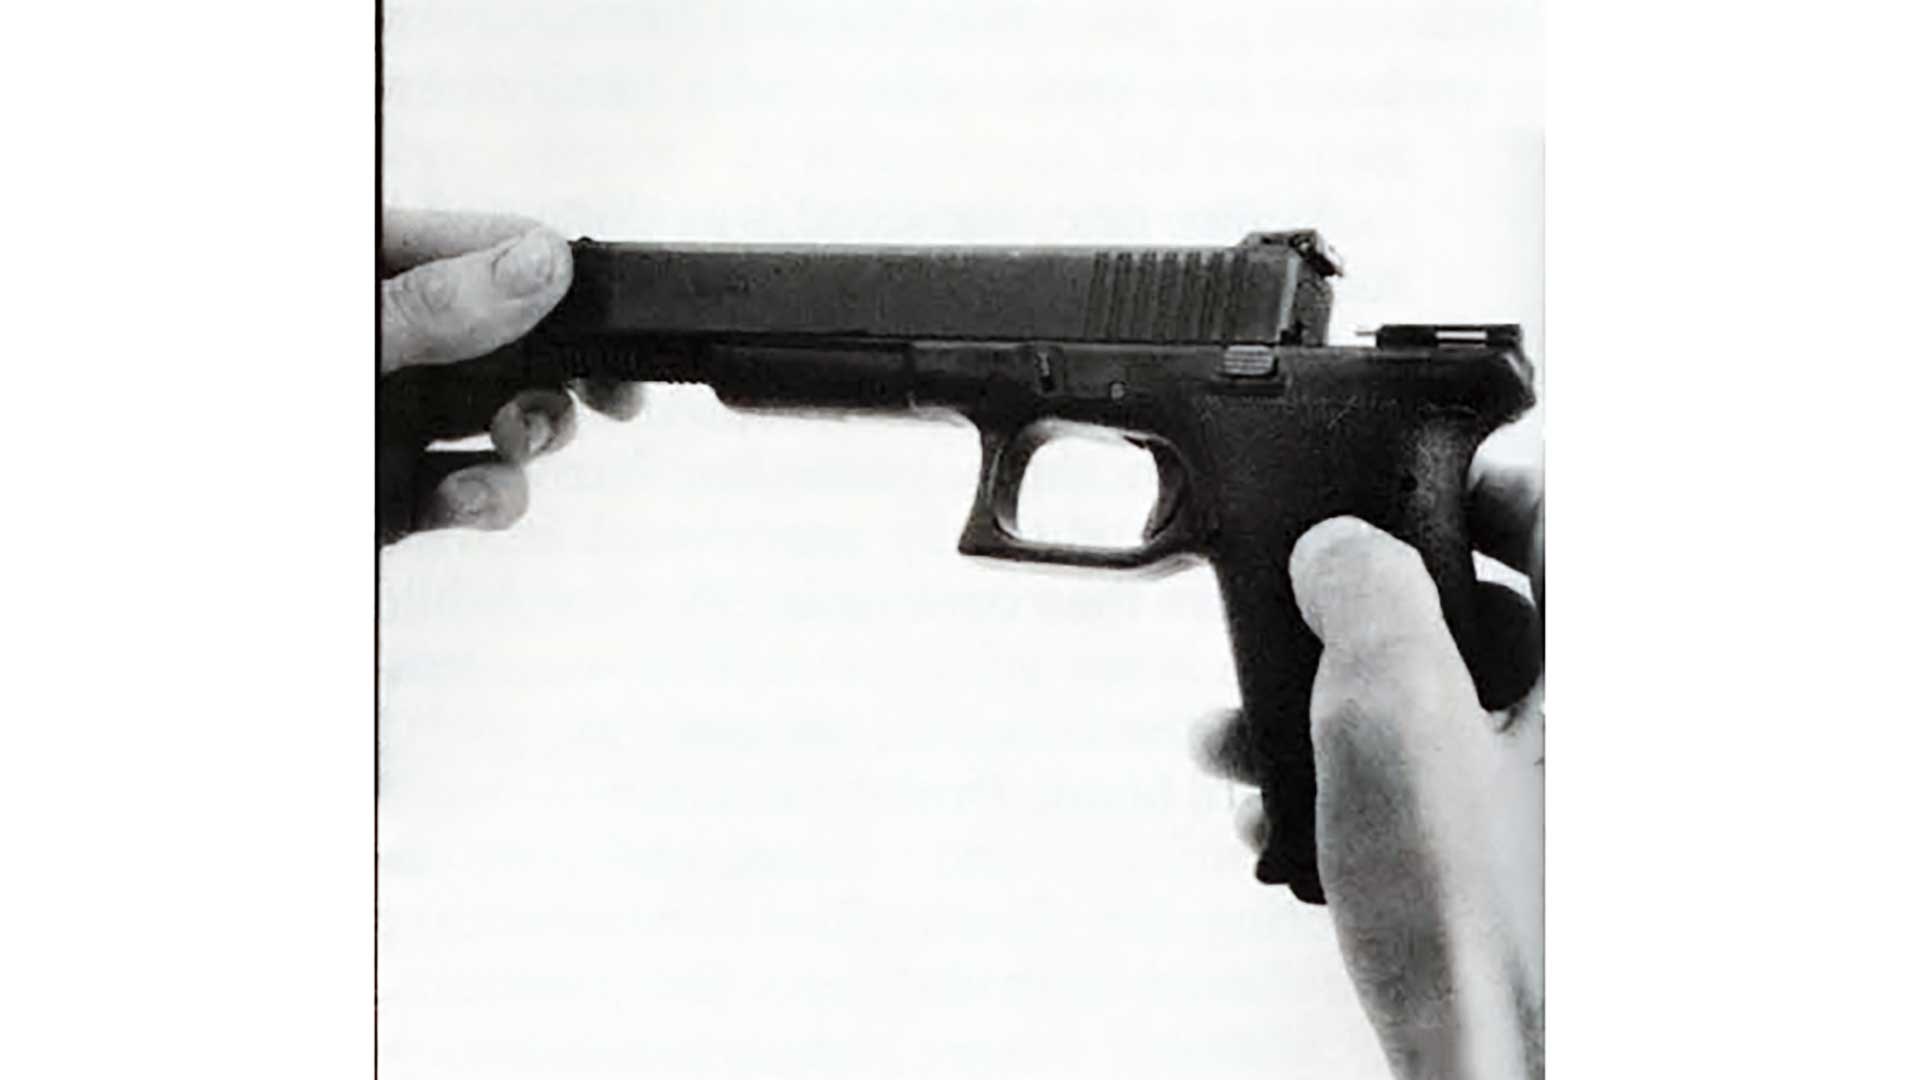 A hand removing the slide of a Glock 17 pistol from its frame.